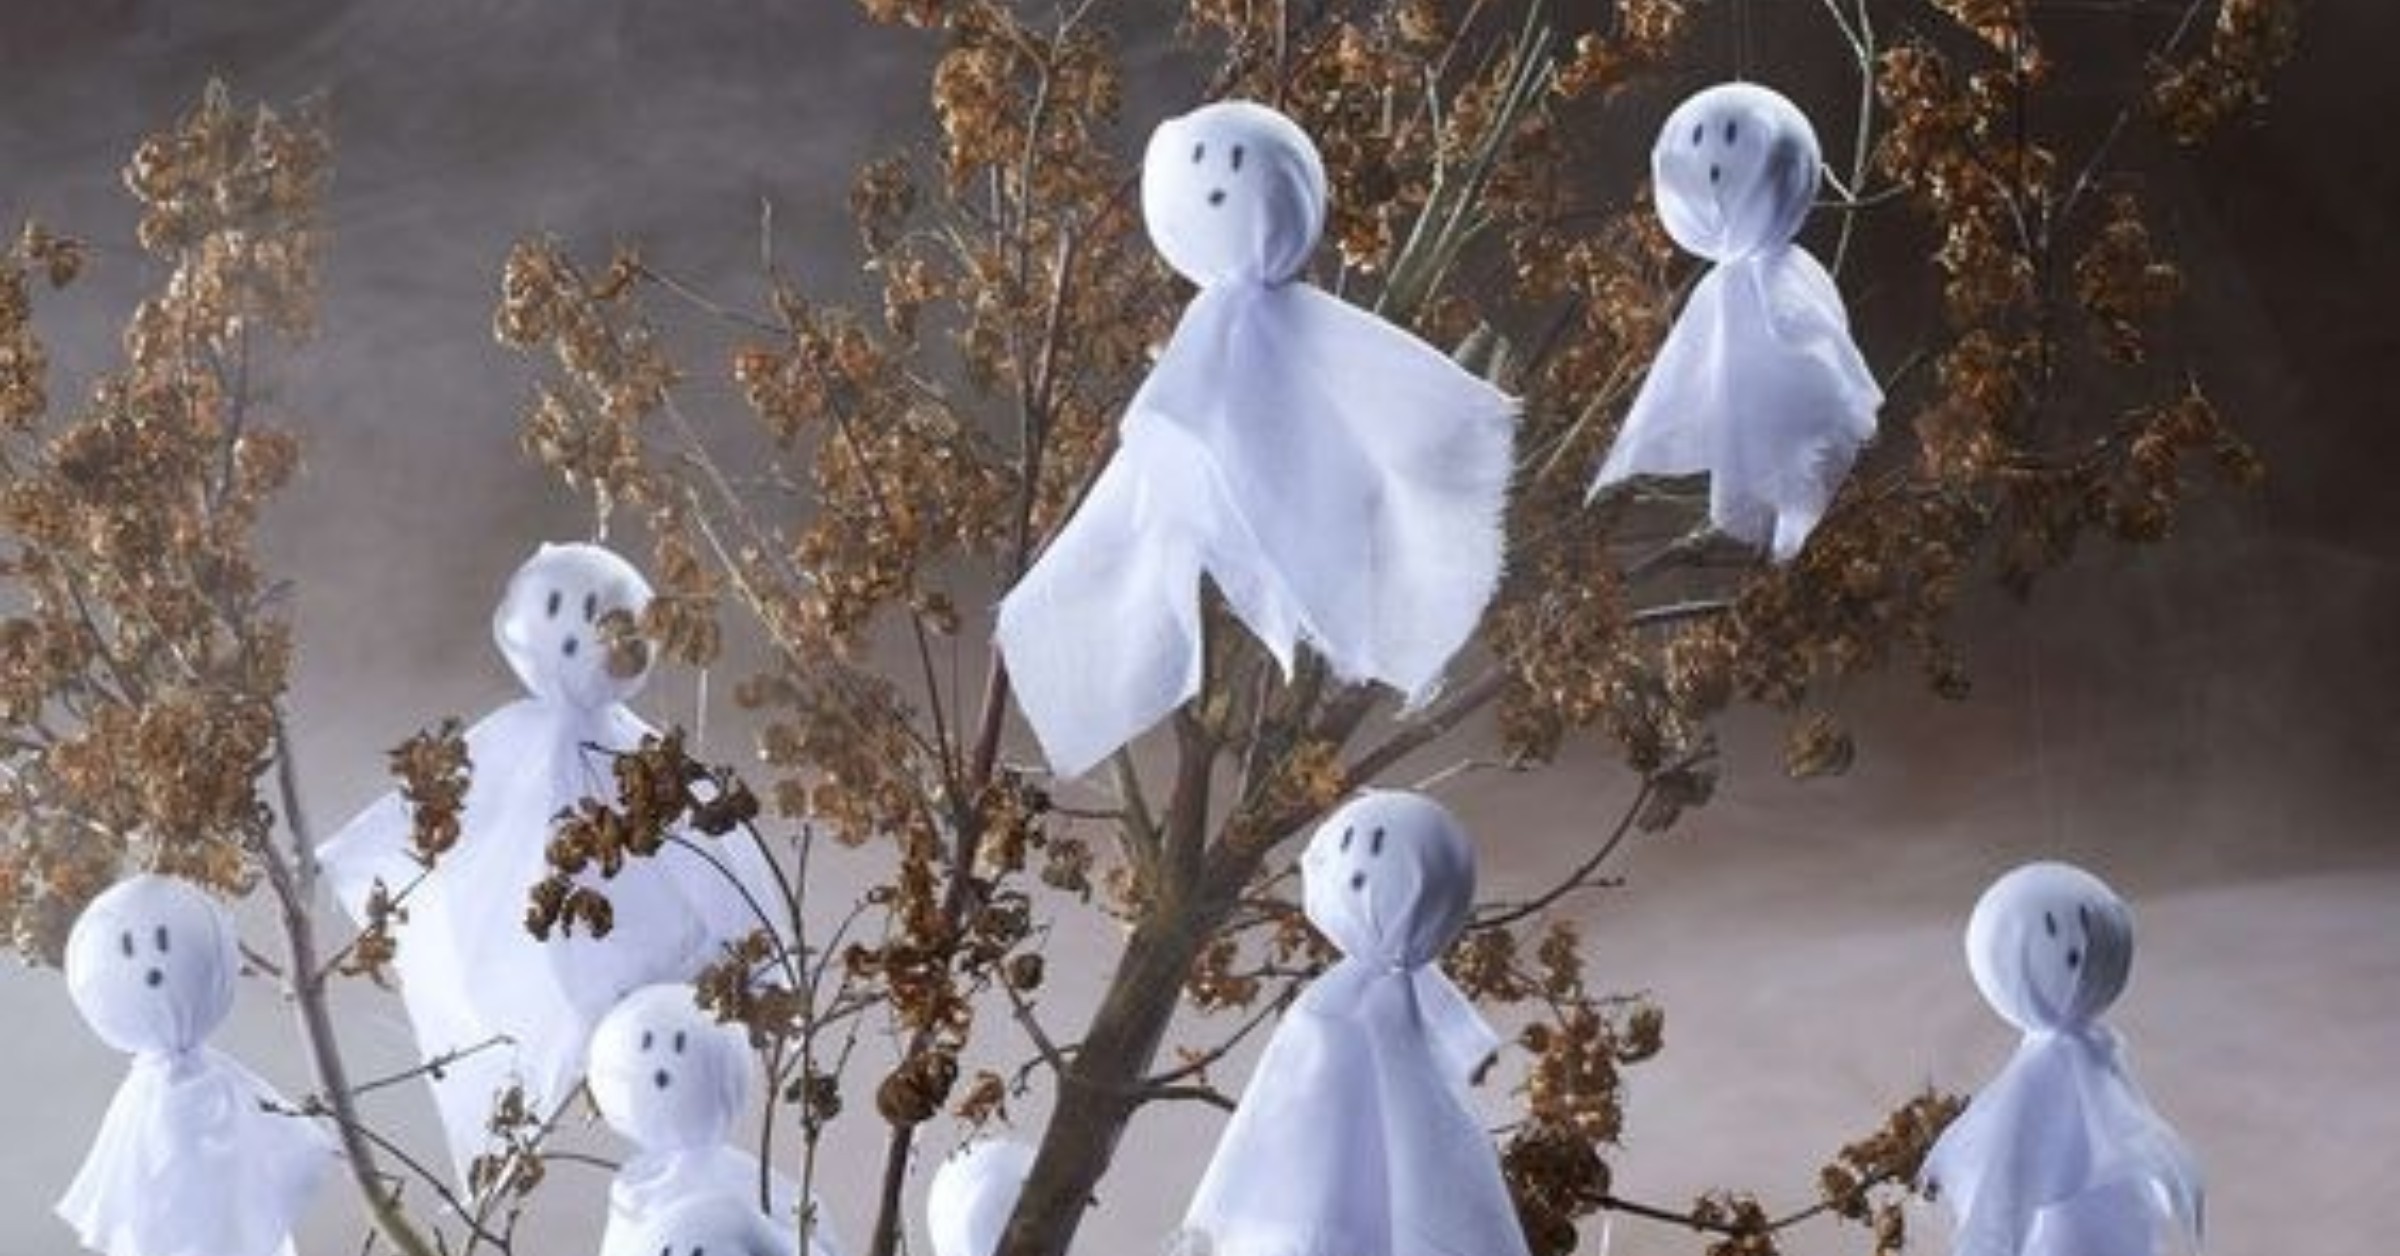 A sustainable Halloween - diy ghost image 